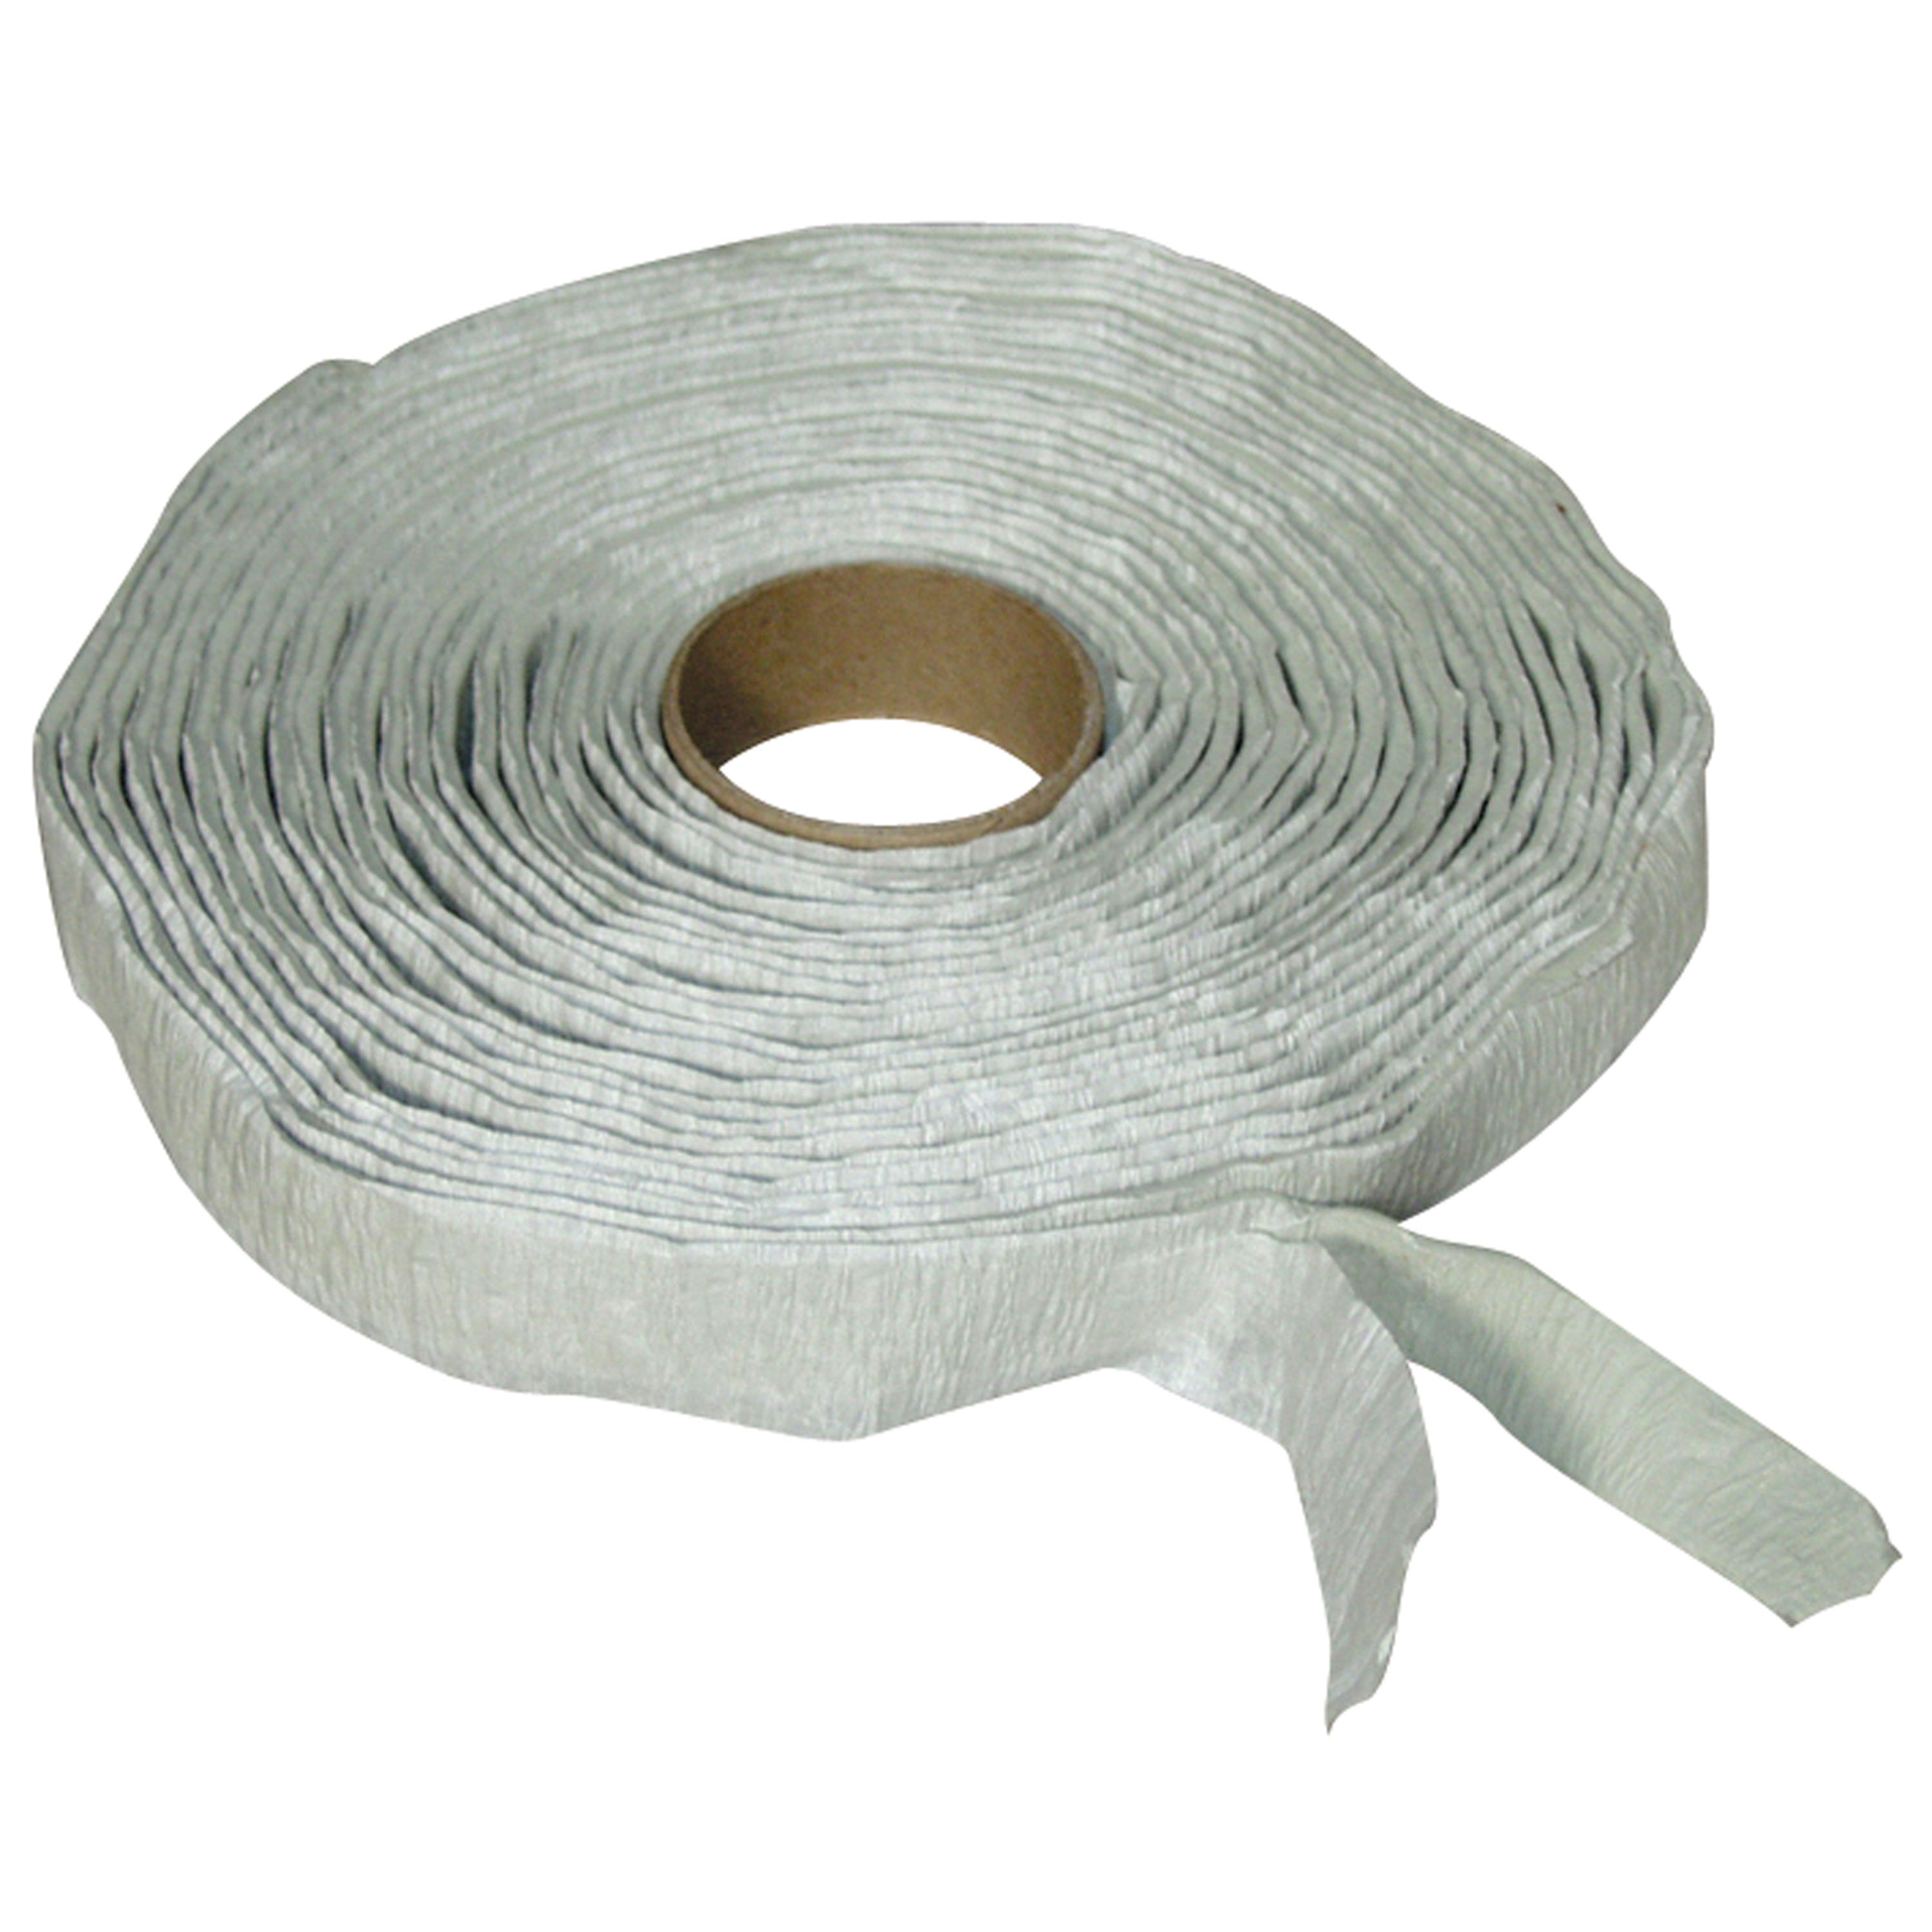 Heng's 16-5855 Trimmable Butyl Tape - 3/16" x 3/4" x 20'